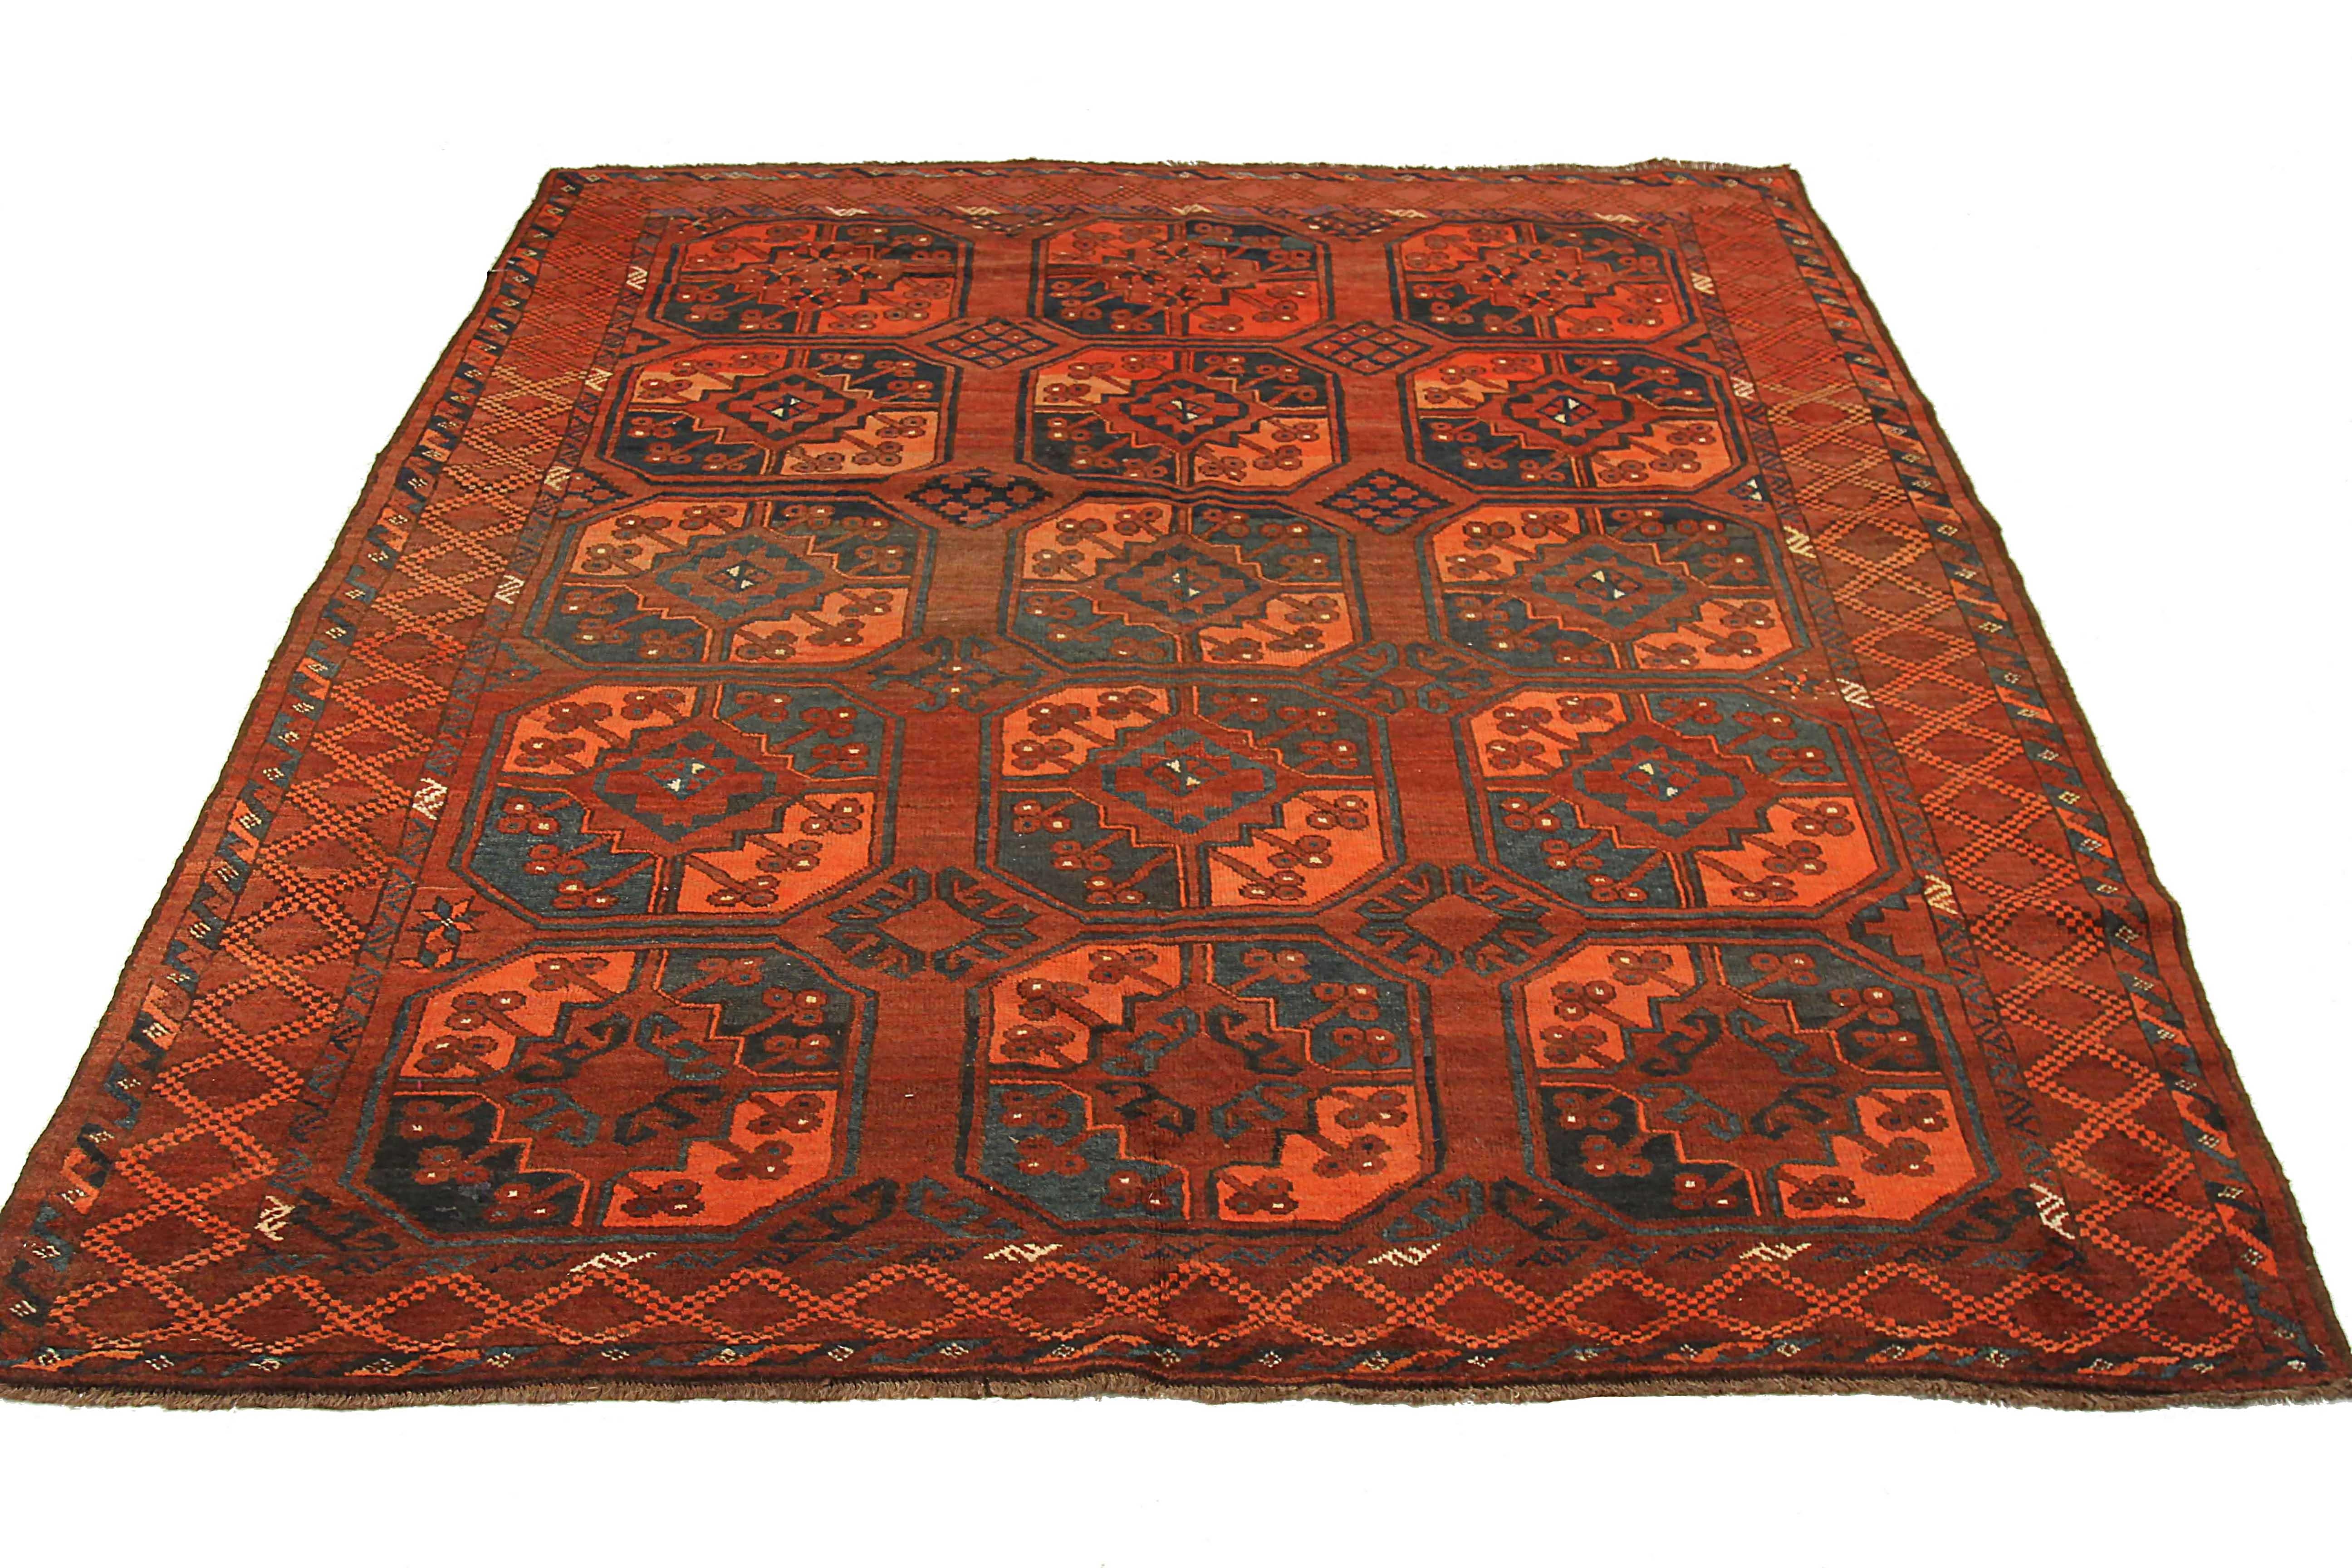 Antique Afghan area rug handwoven from the finest sheep’s wool. It’s colored with all-natural vegetable dyes that are safe for humans and pets. It’s a traditional Tekeh design handwoven by expert artisans.It’s a lovely area rug that can be